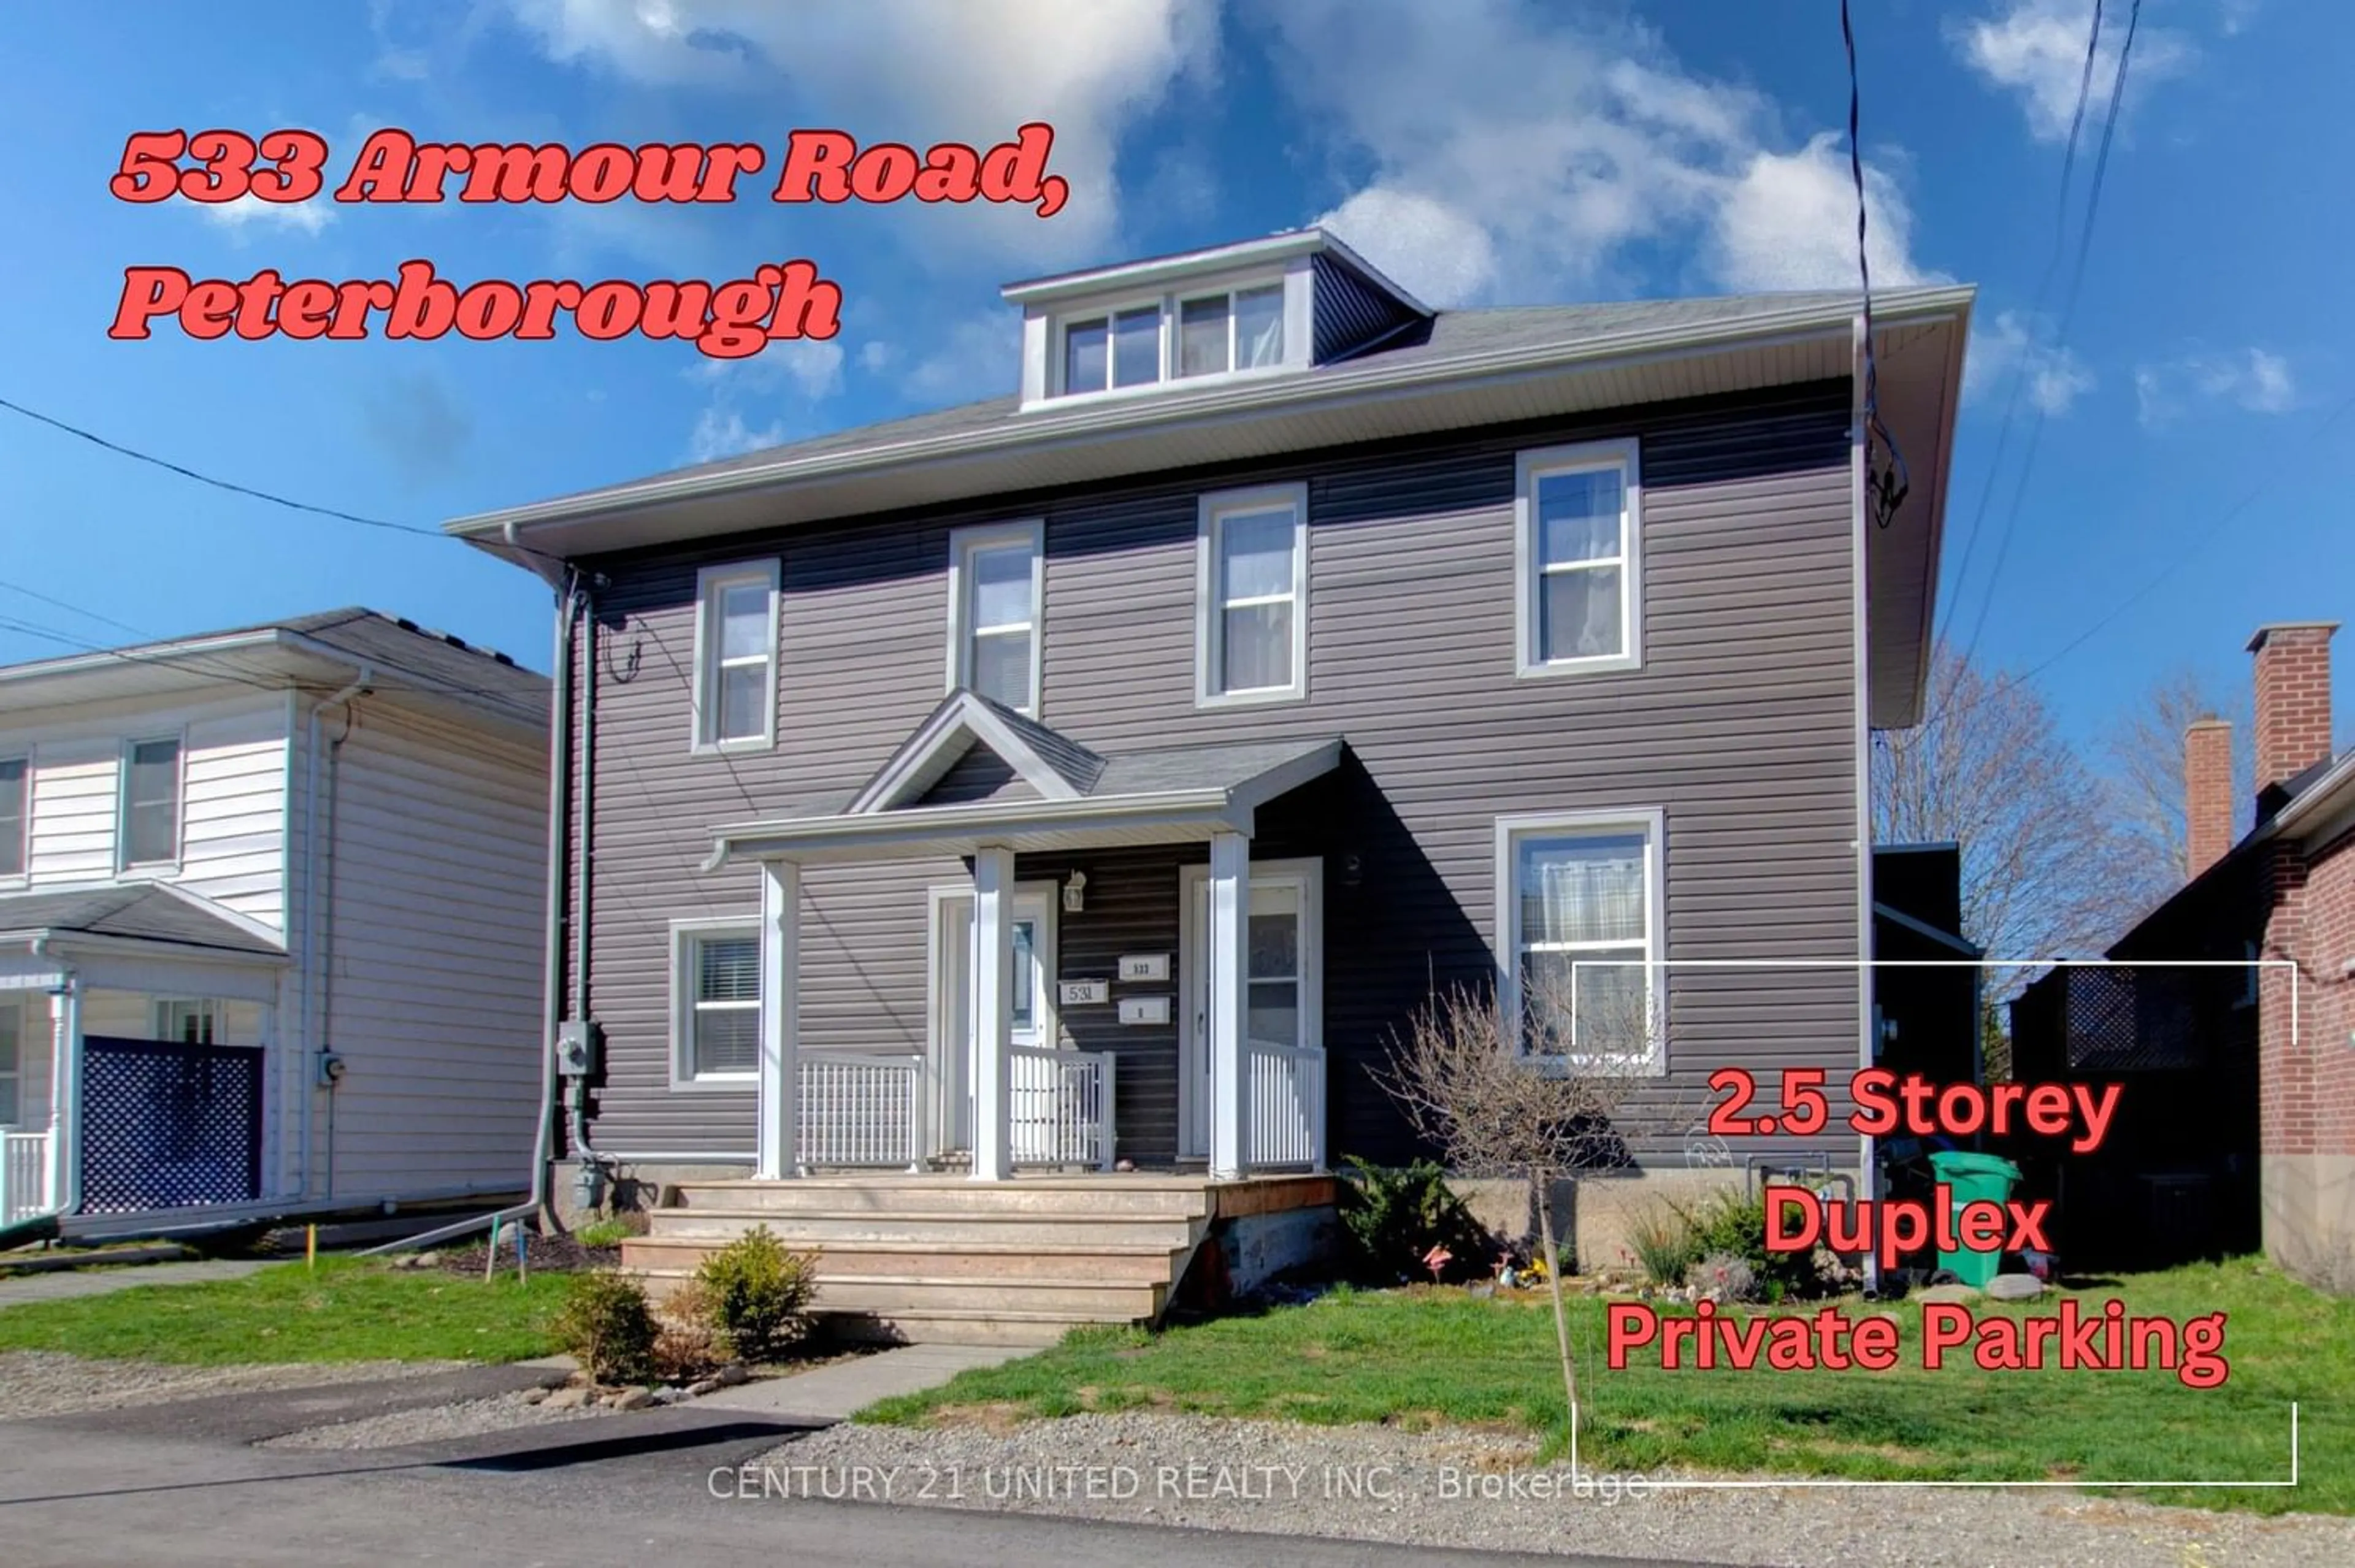 A pic from exterior of the house or condo for 533 Armour Rd, Peterborough Ontario K9H 1Y8